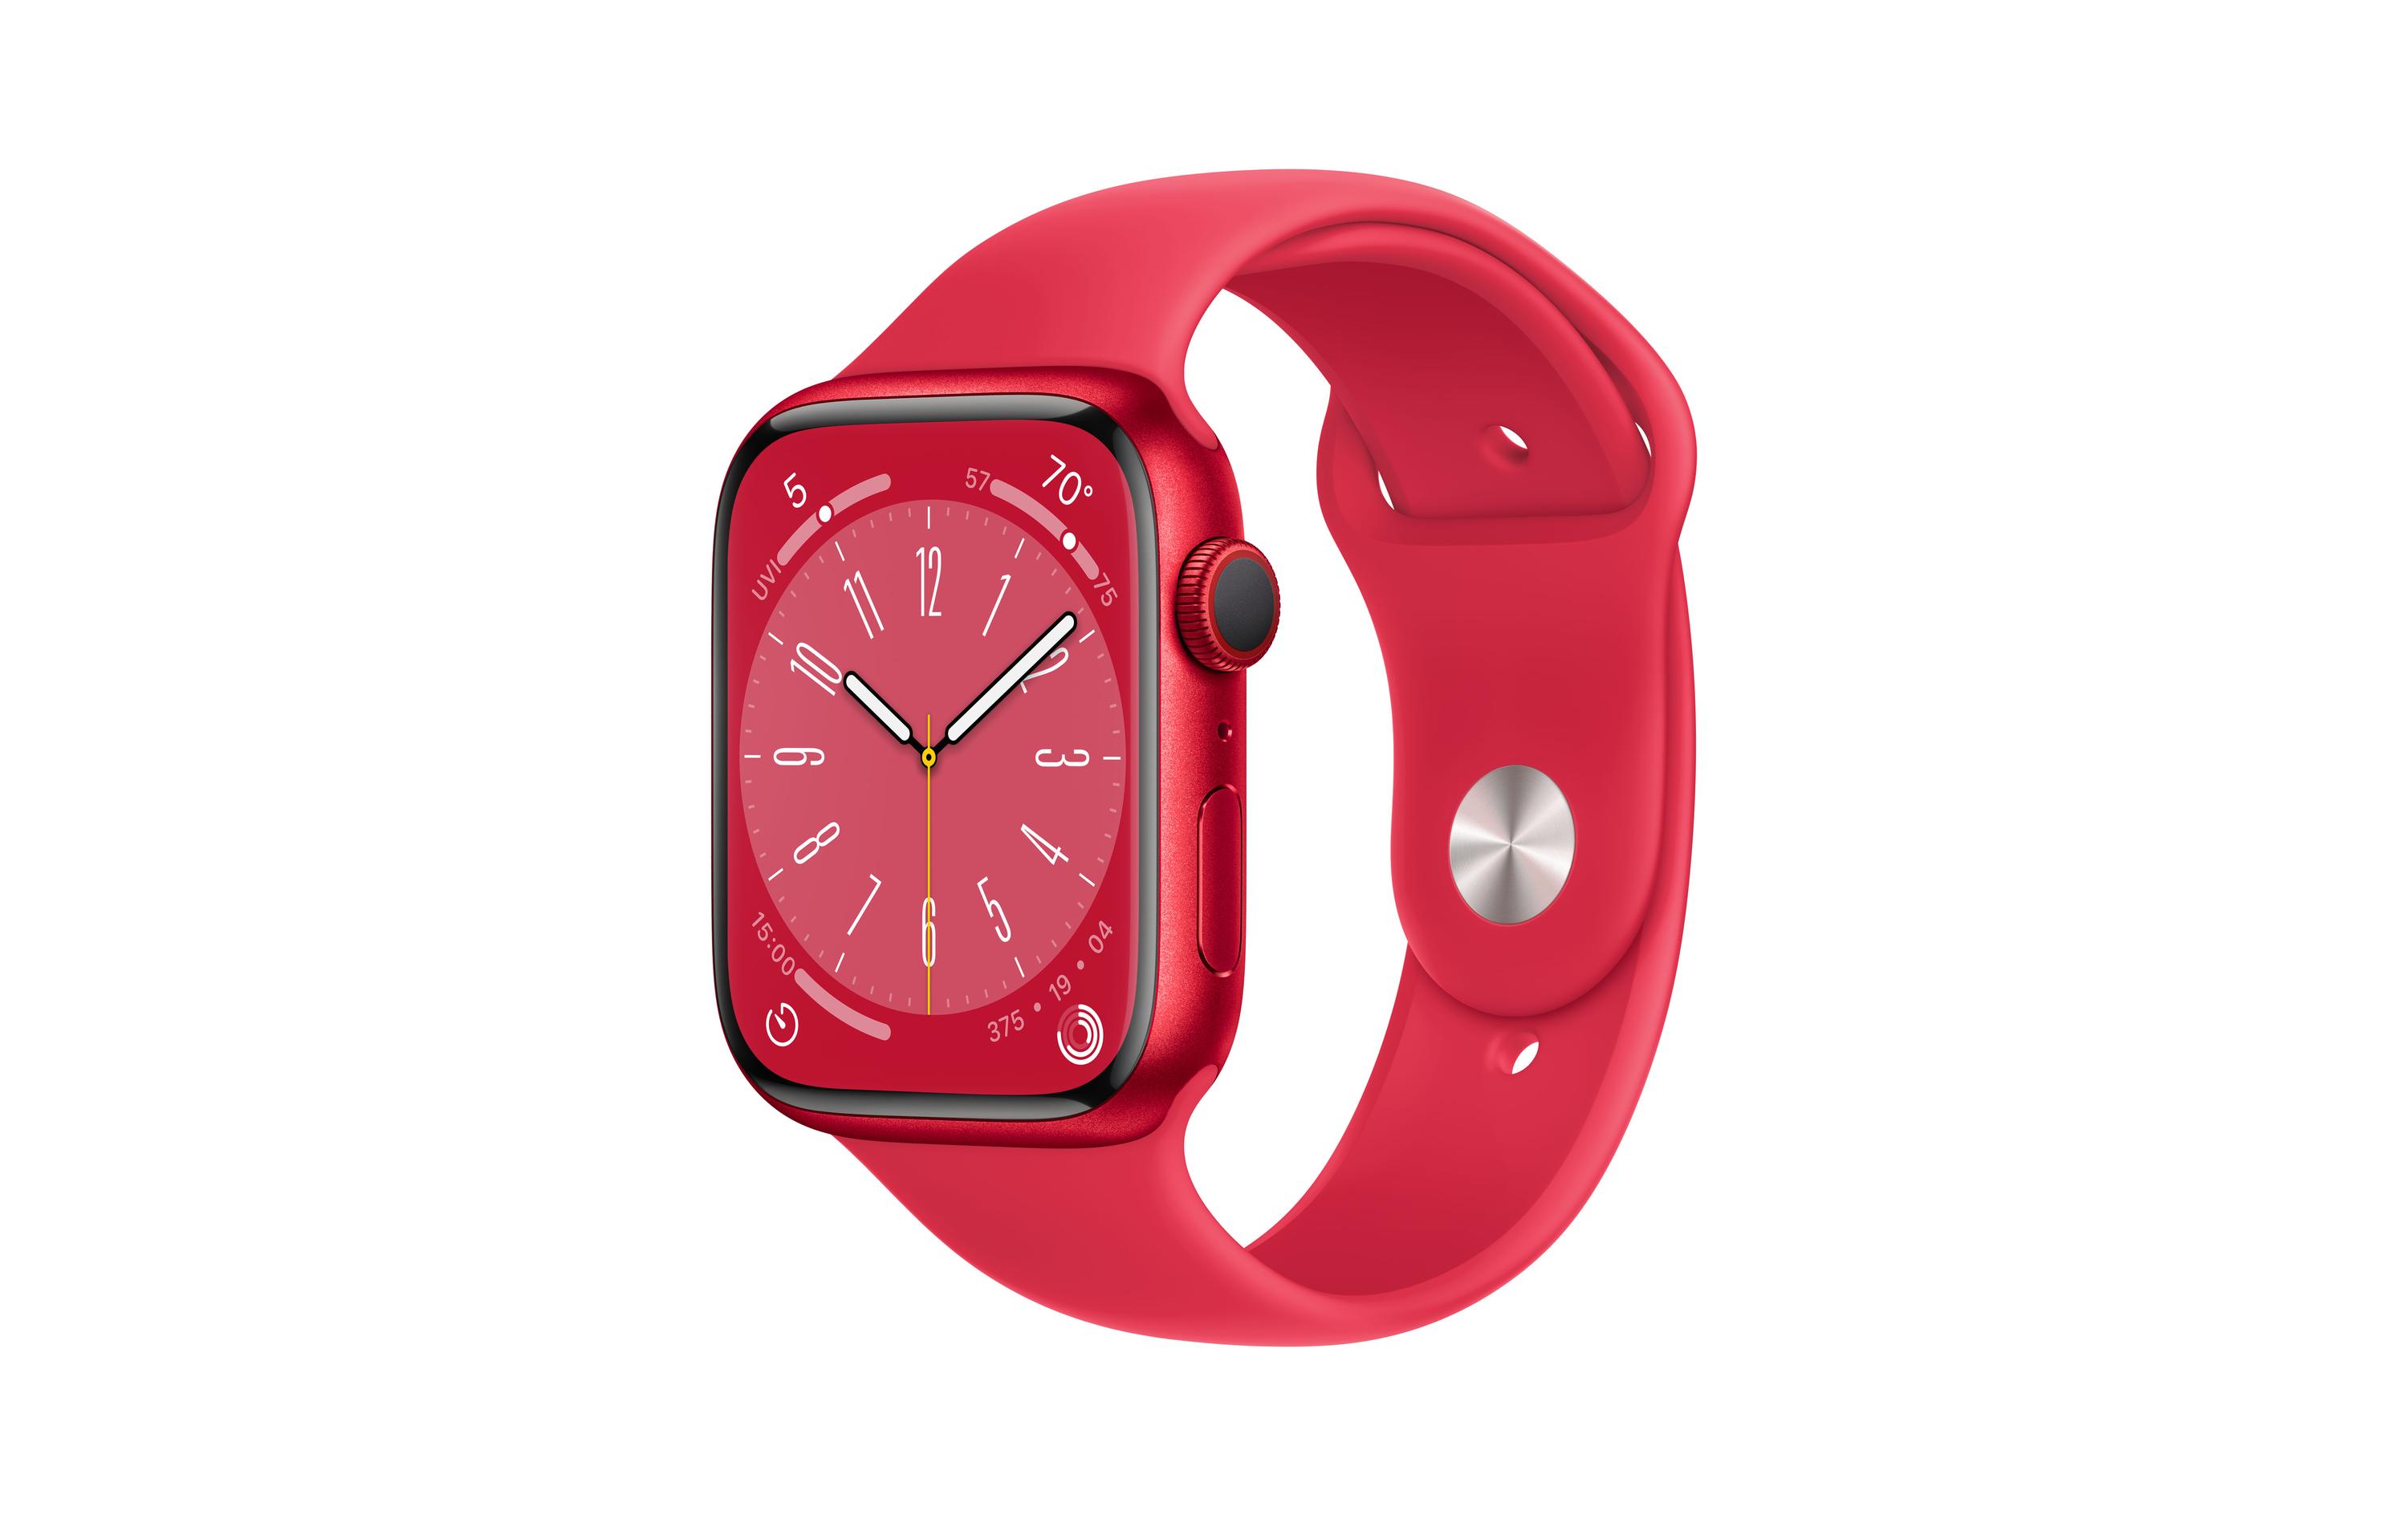 Apple Watch Series 8 45 mm LTE Alu (PRODUCT)RED Sport